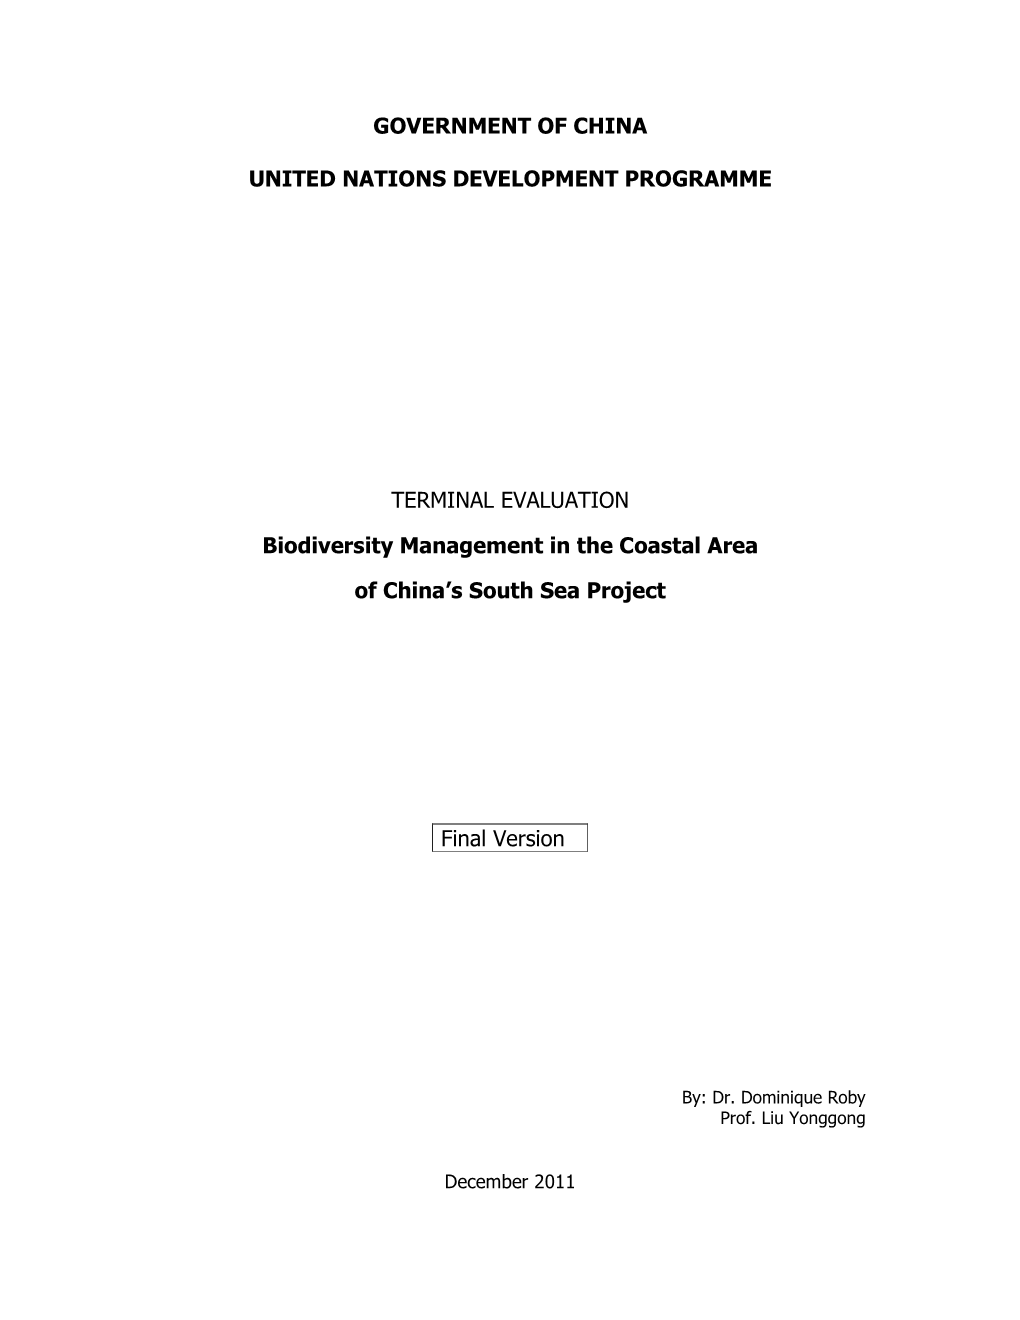 Government of China United Nations Development